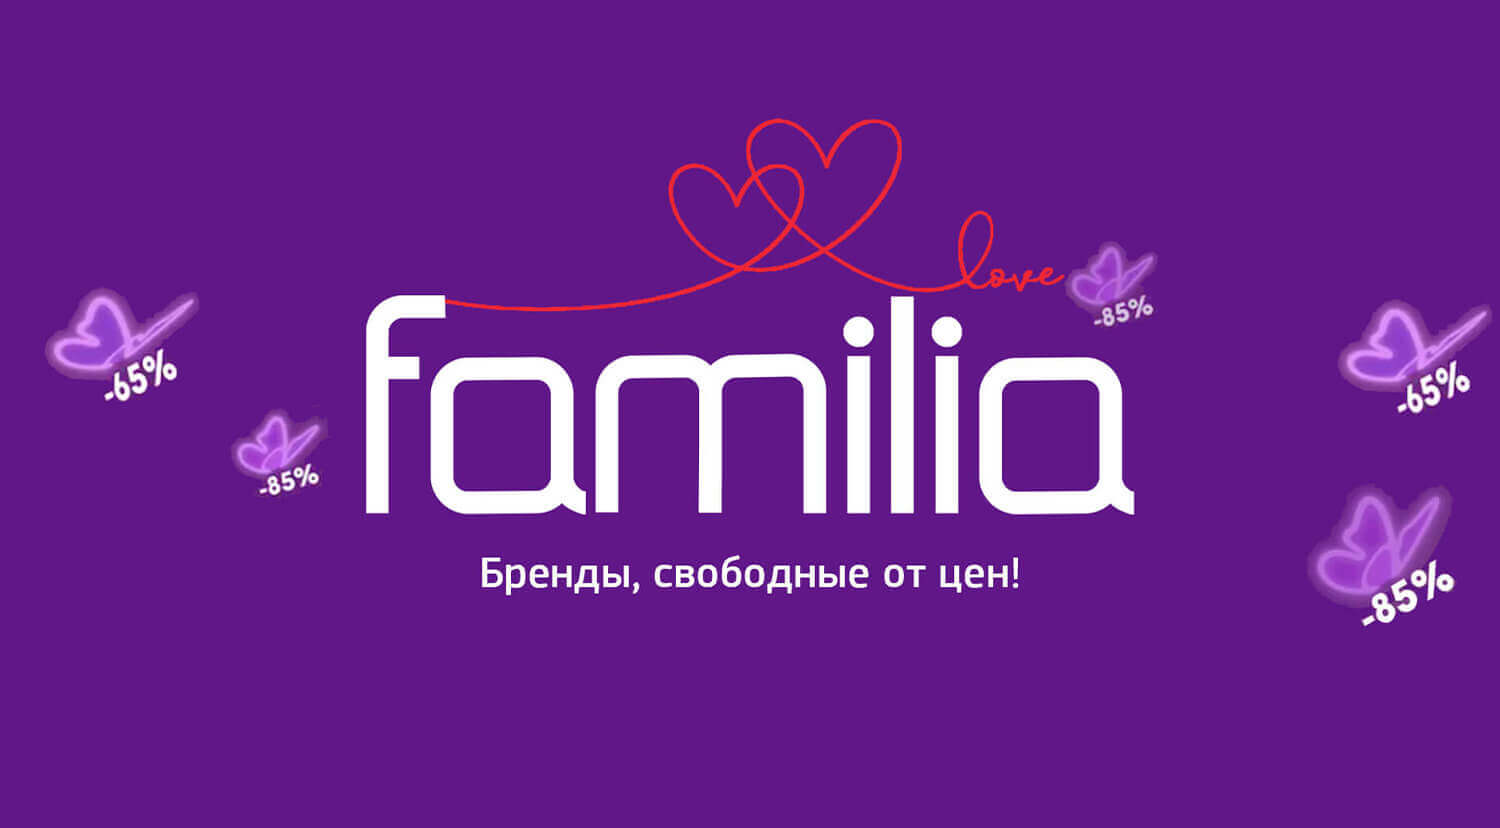 Familia fashion store Russia, Retail Branding and Graphic Communications - CampbellRigg Agency